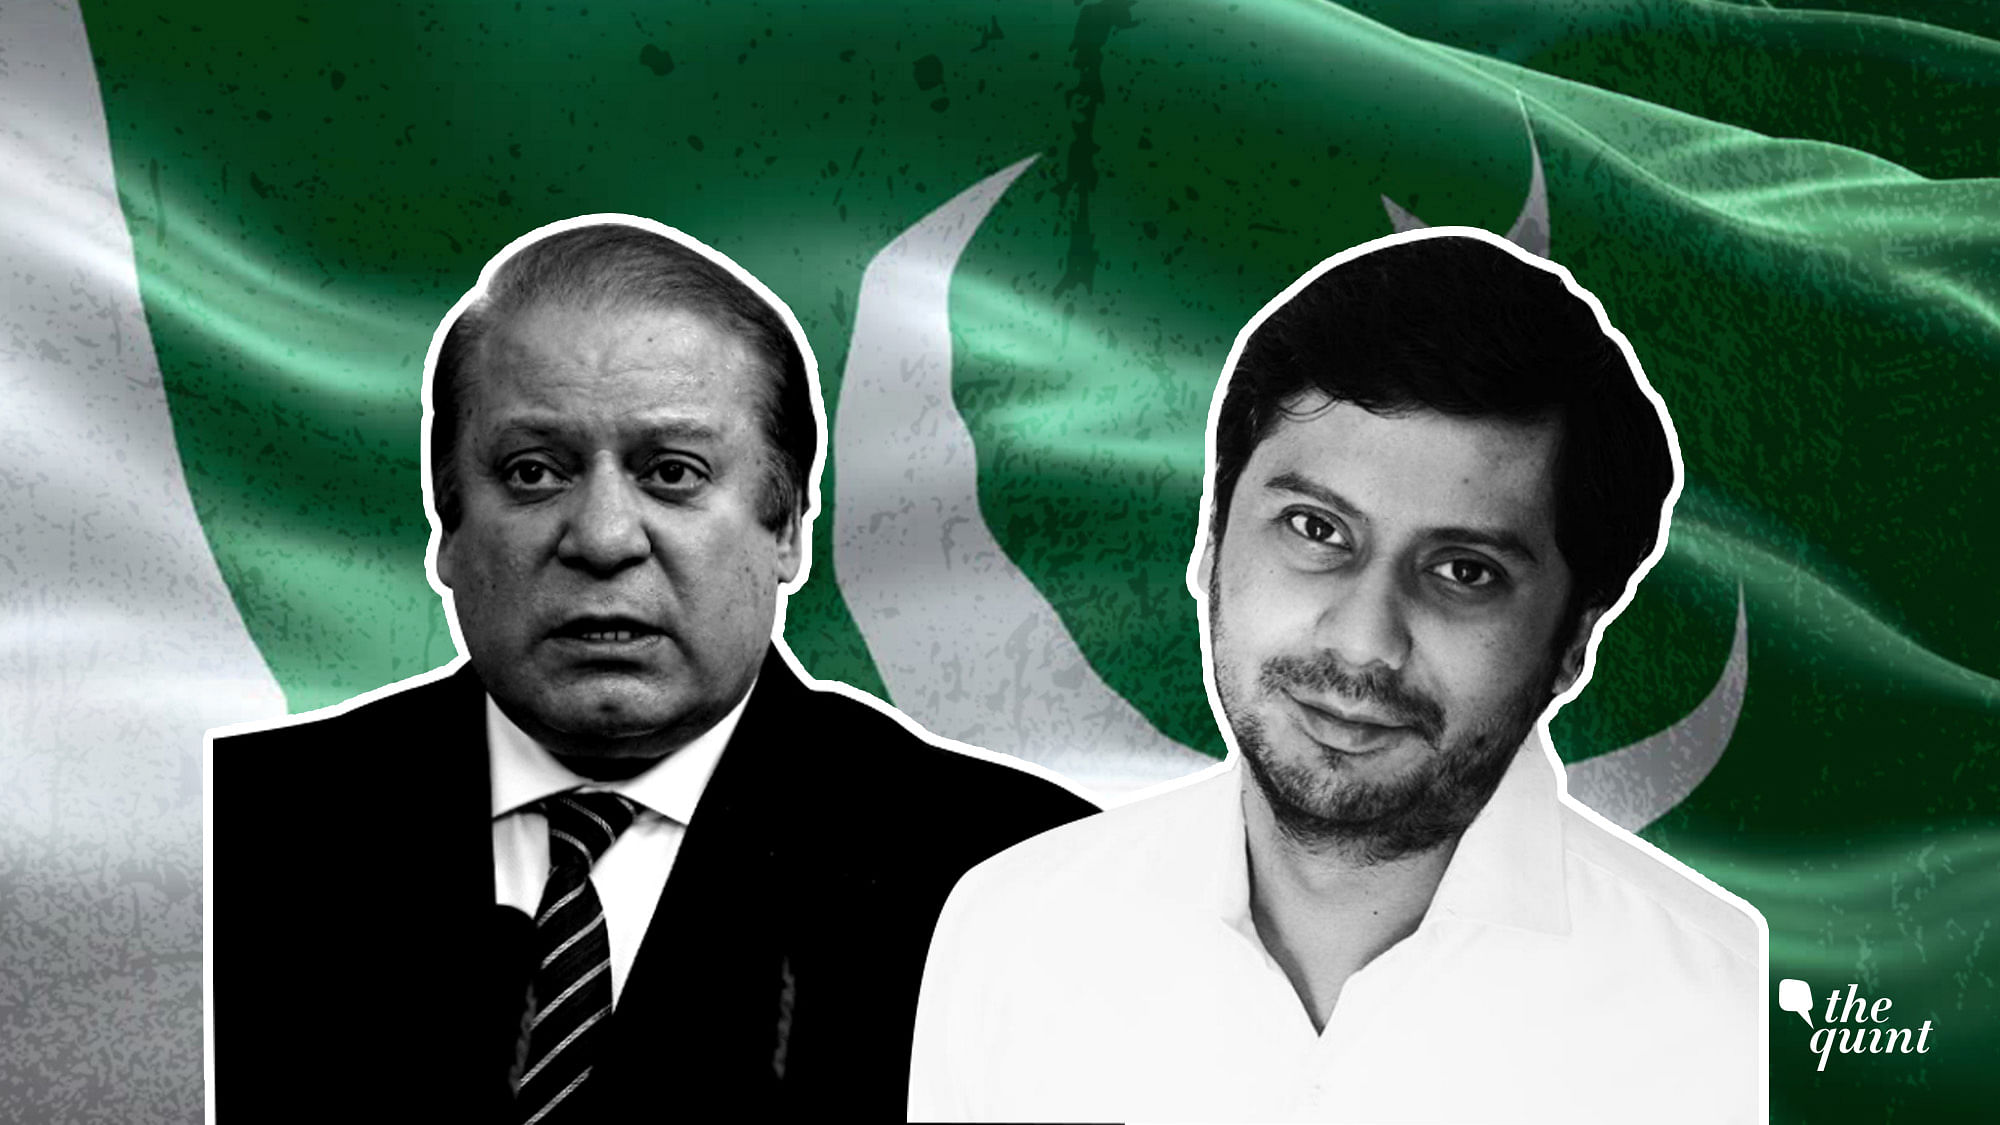 Image of accused former PM Nawaz Sharif (L) and ‘Dawn’ journalist Cyril Almeida (R) used for representational purposes.